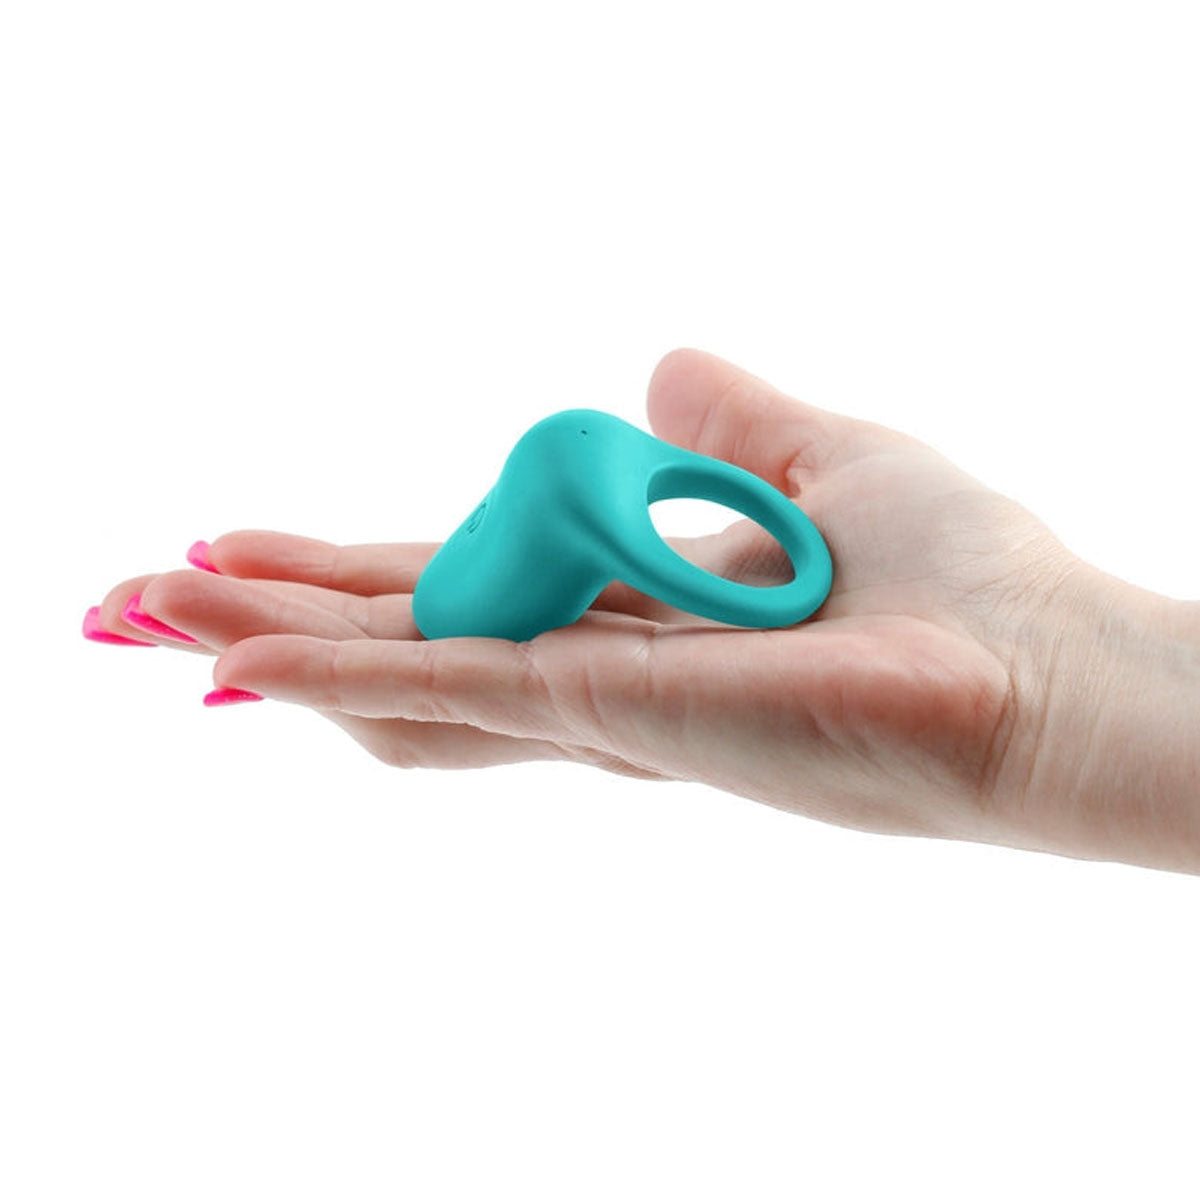 Woman's hand holding a teal vibrating silicone ring with a flat head Nudie Co